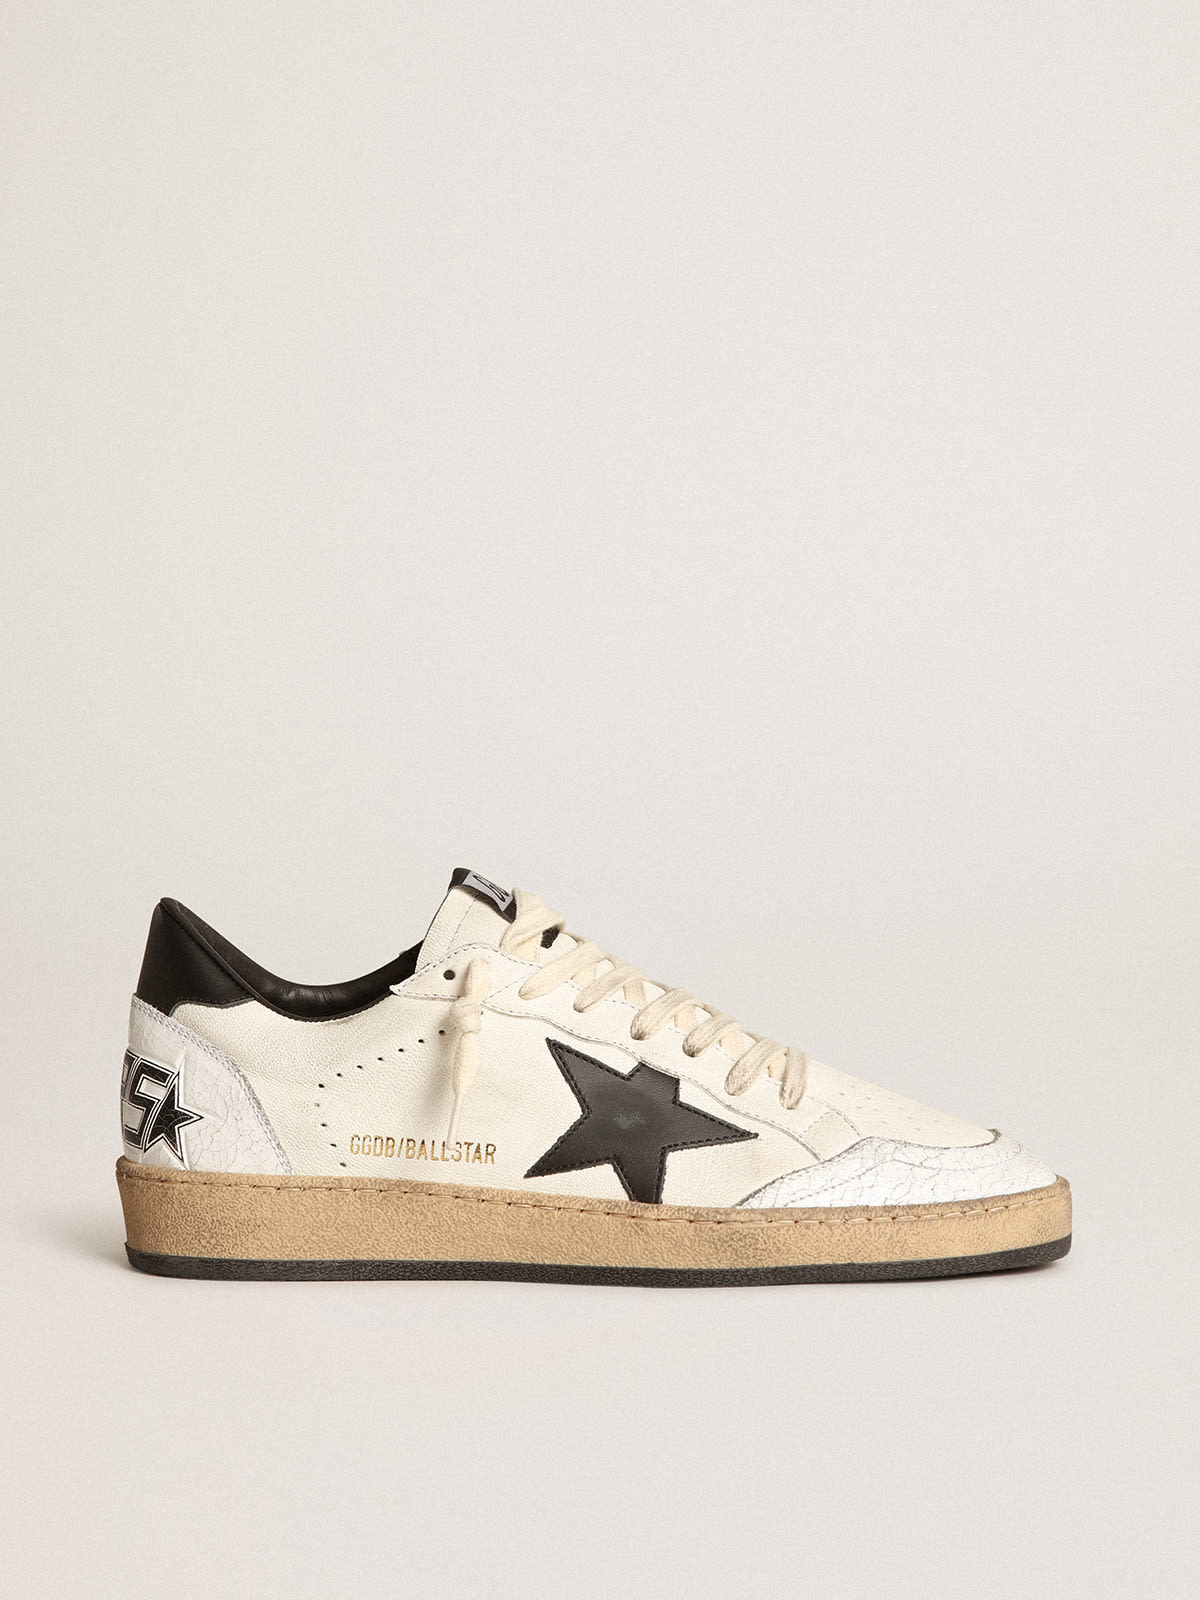 Golden Goose - Women's Ball Star in nappa with white star and black heel tab in 